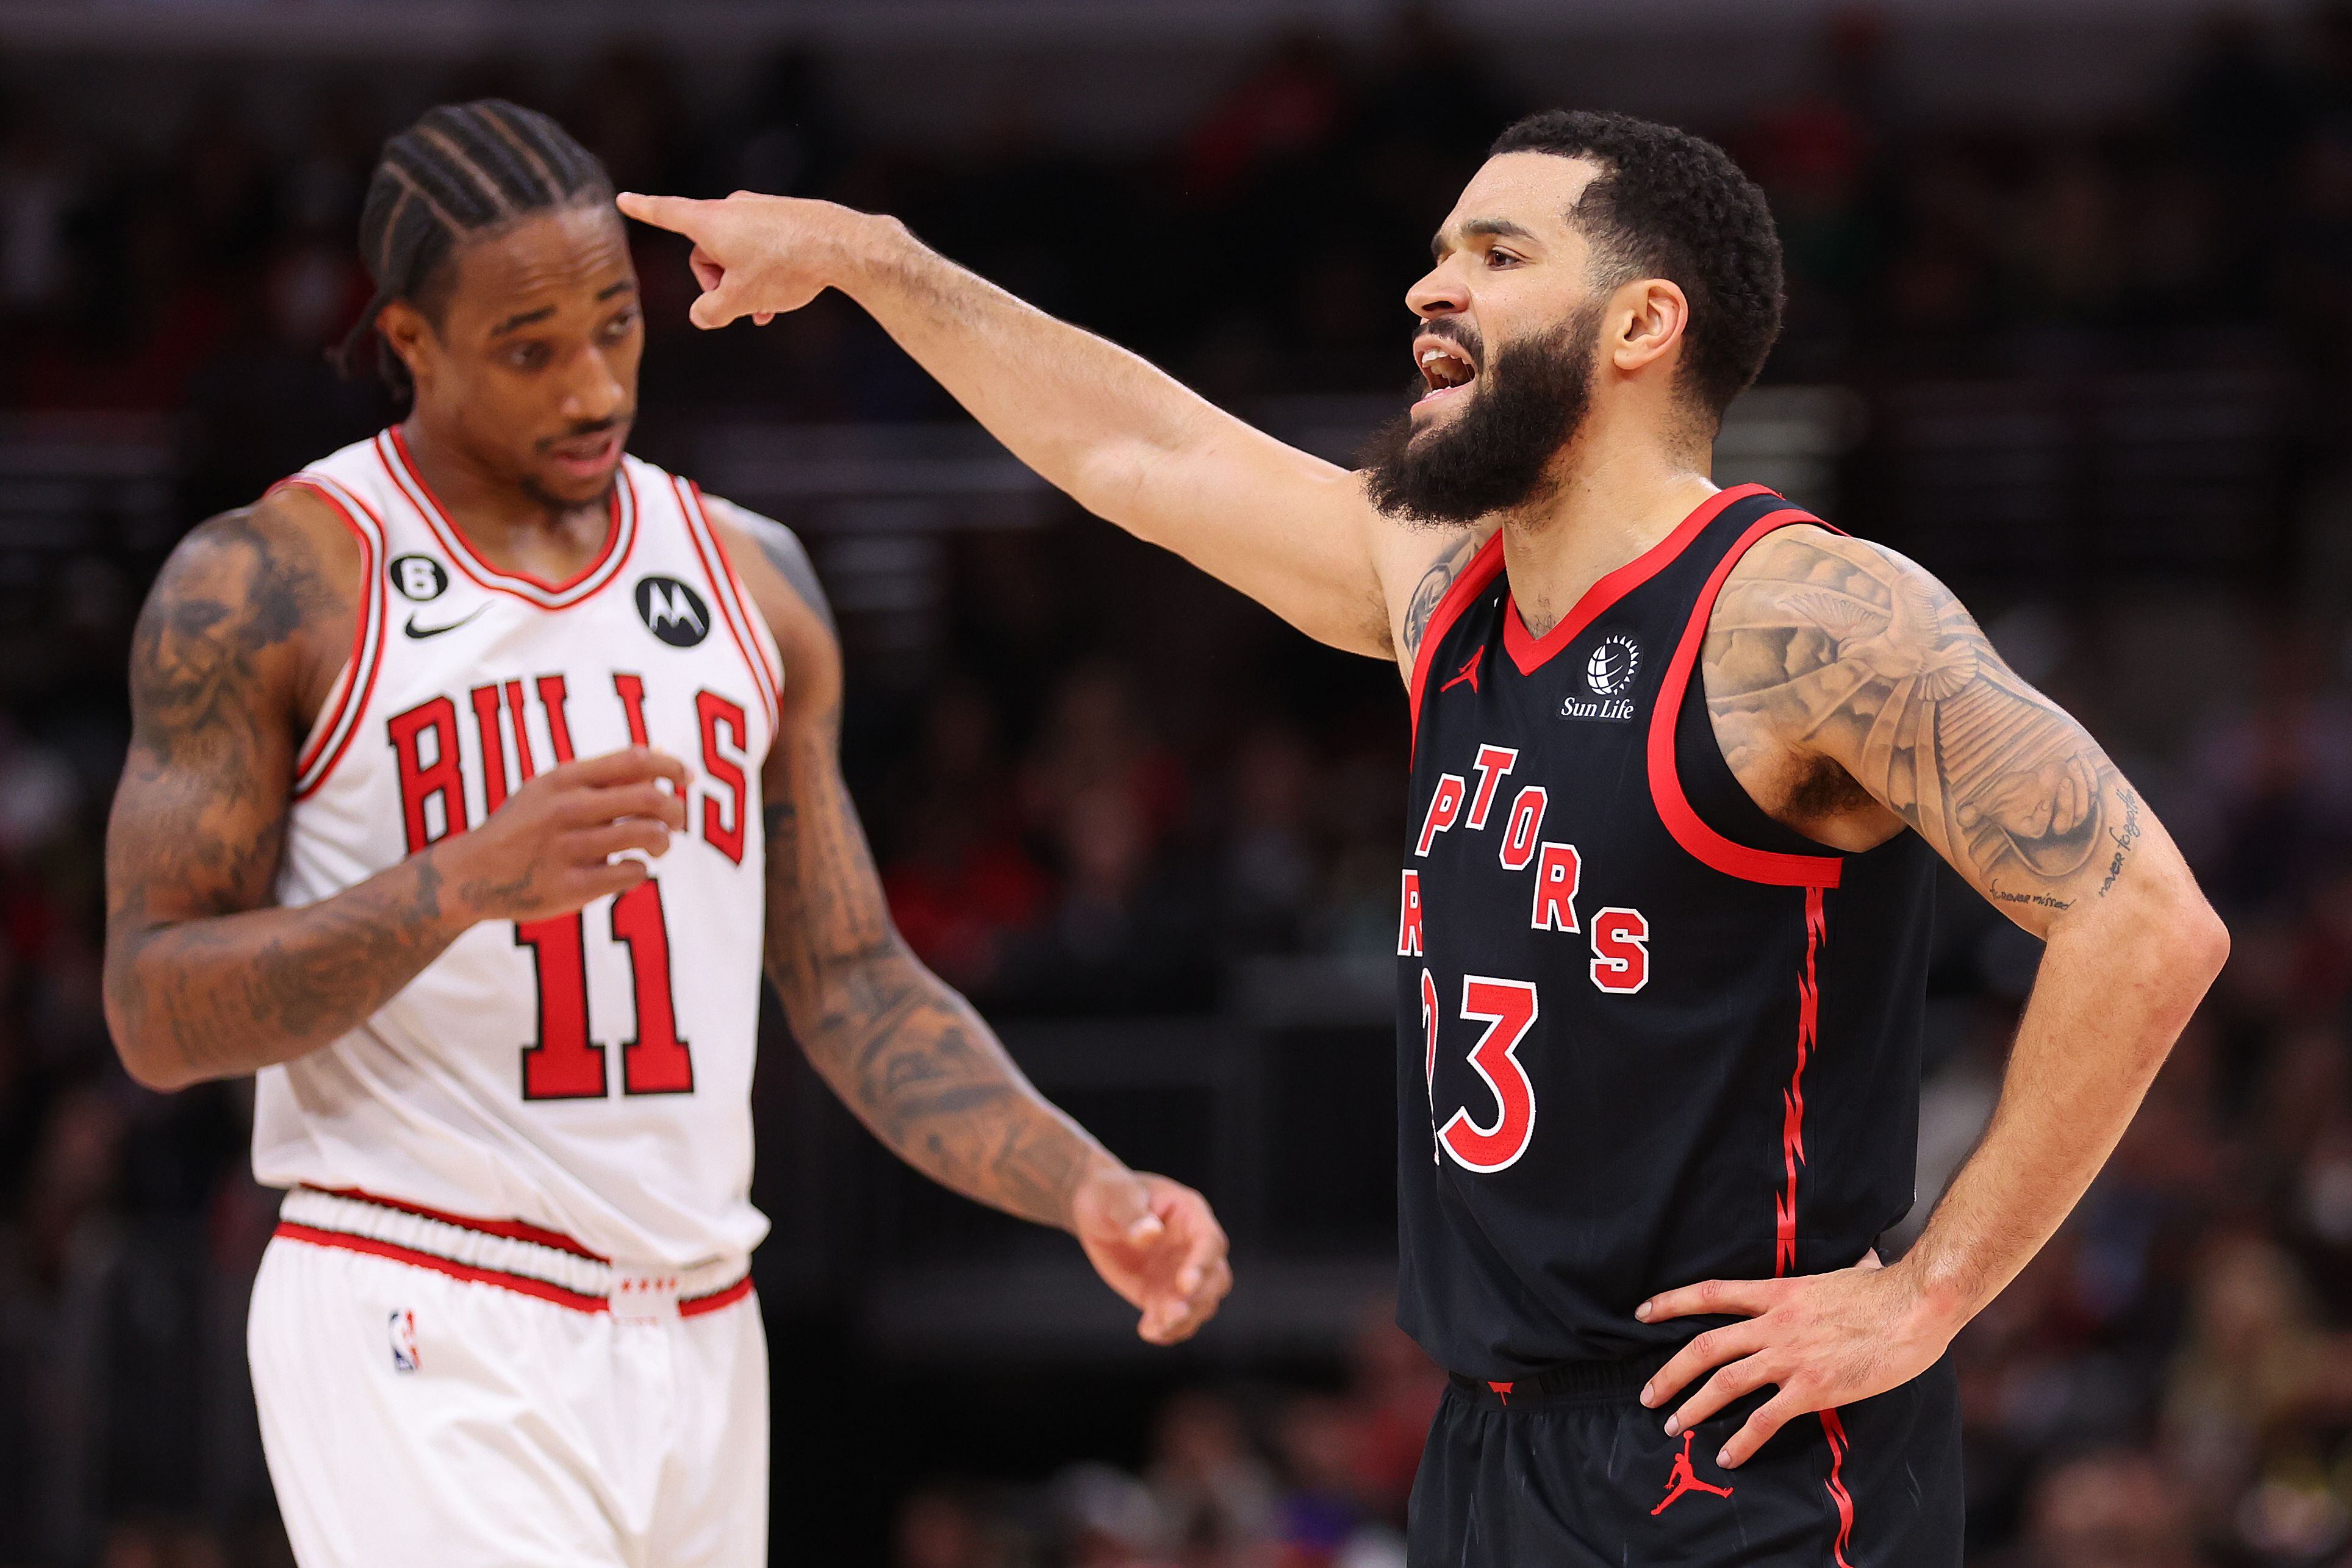 Raptors vs. 76ers prediction, betting odds for NBA Playoffs Game 5